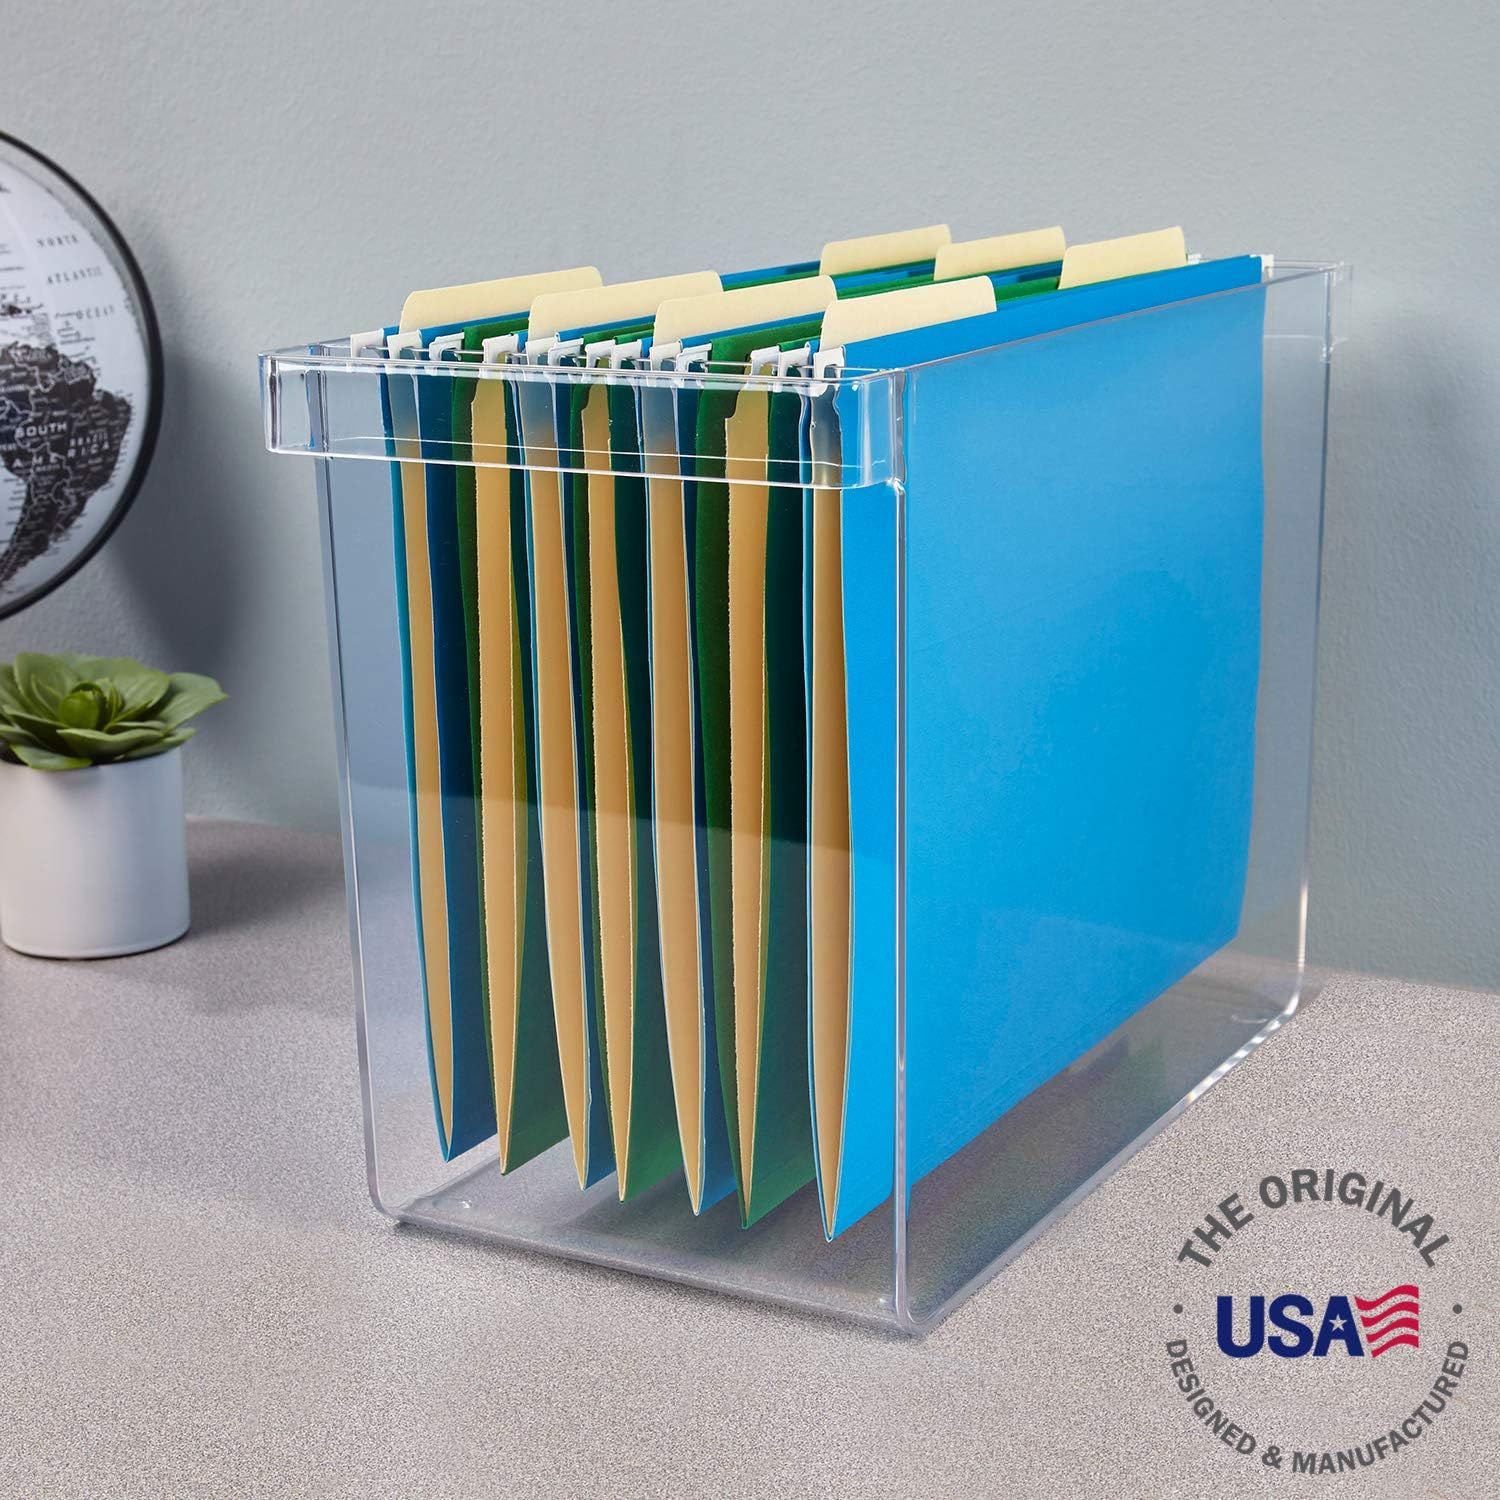 STORi Clear Plastic Hanging File Organizer with Handles | Amazon (US)